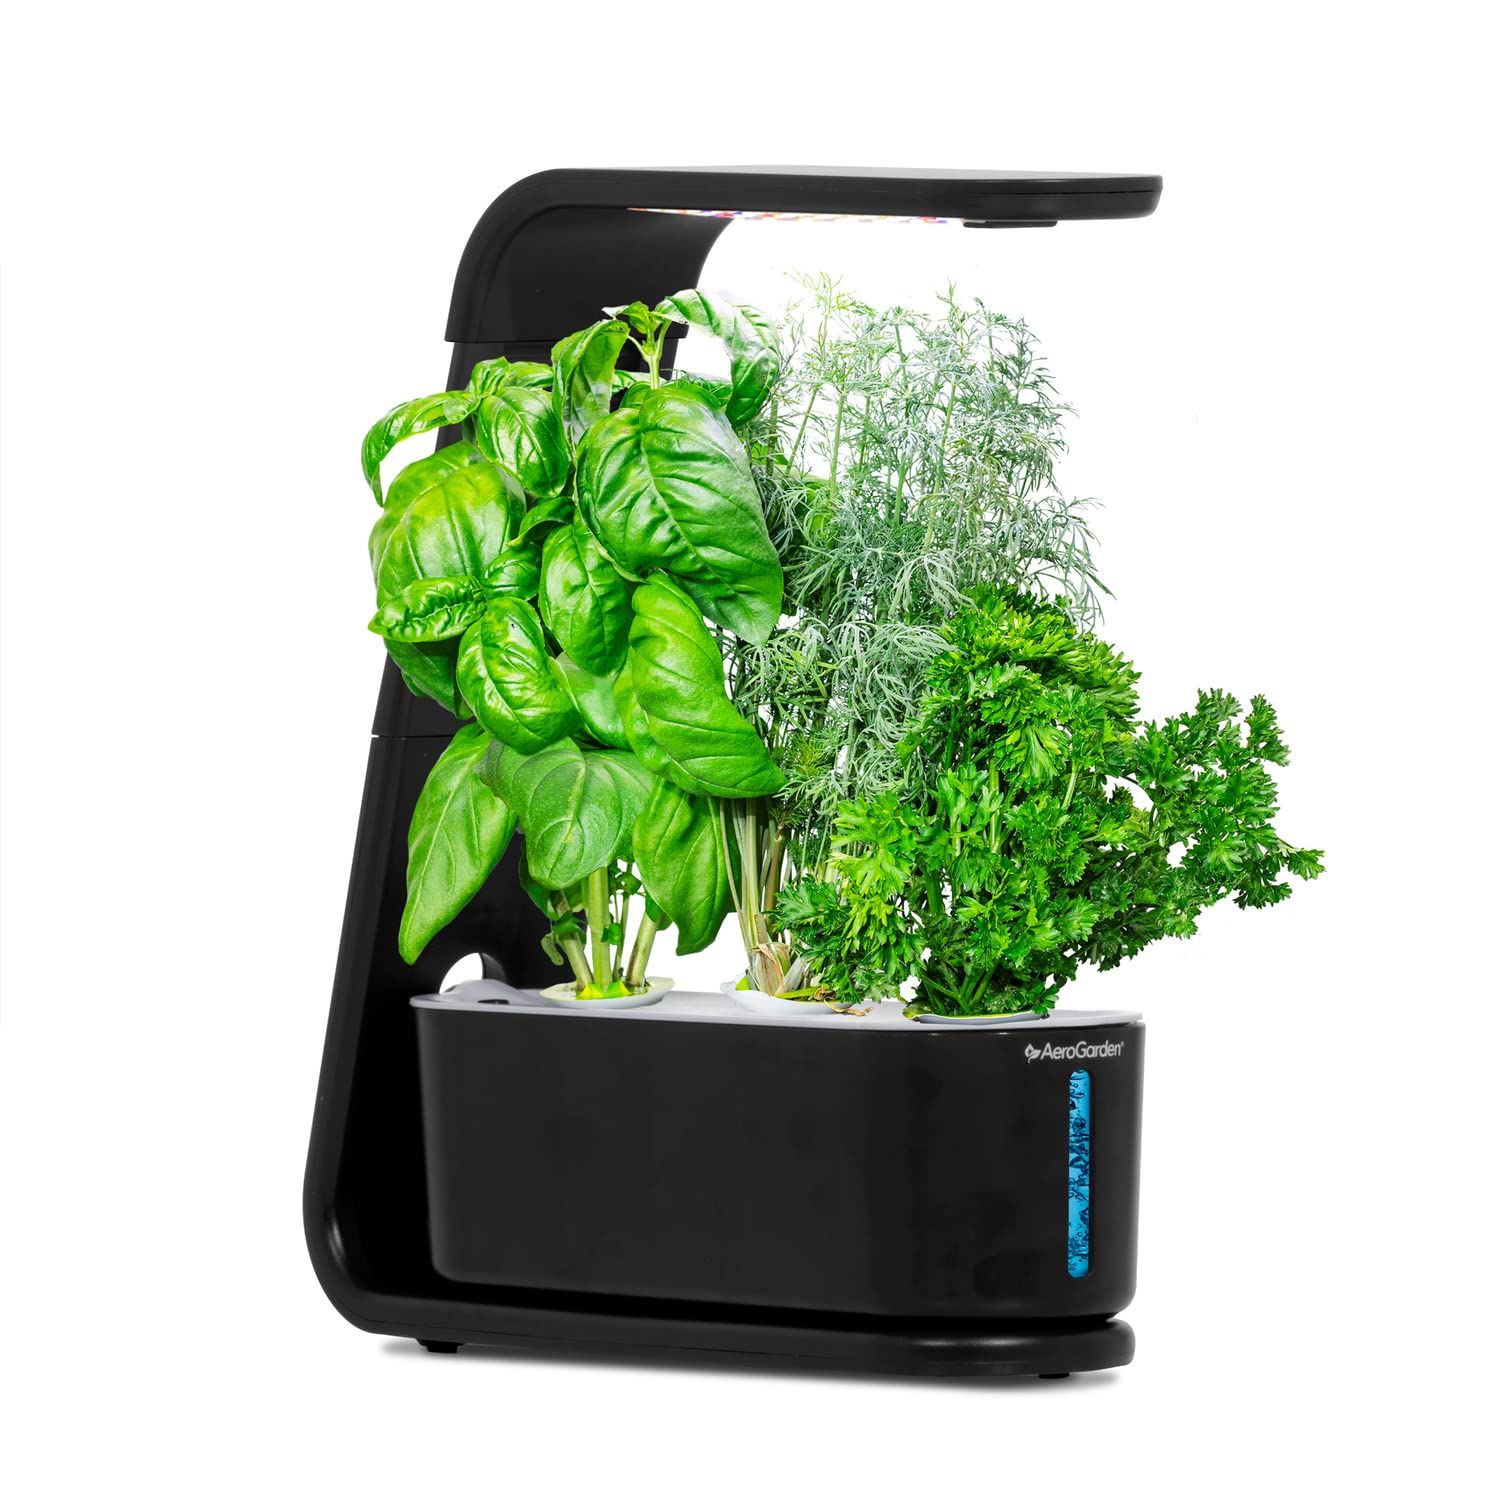 AeroGarden Sprout w/ Gourmet Herbs Seed Pod Hydroponic Indoor Garden Kit (Black) $40 + Free Shipping